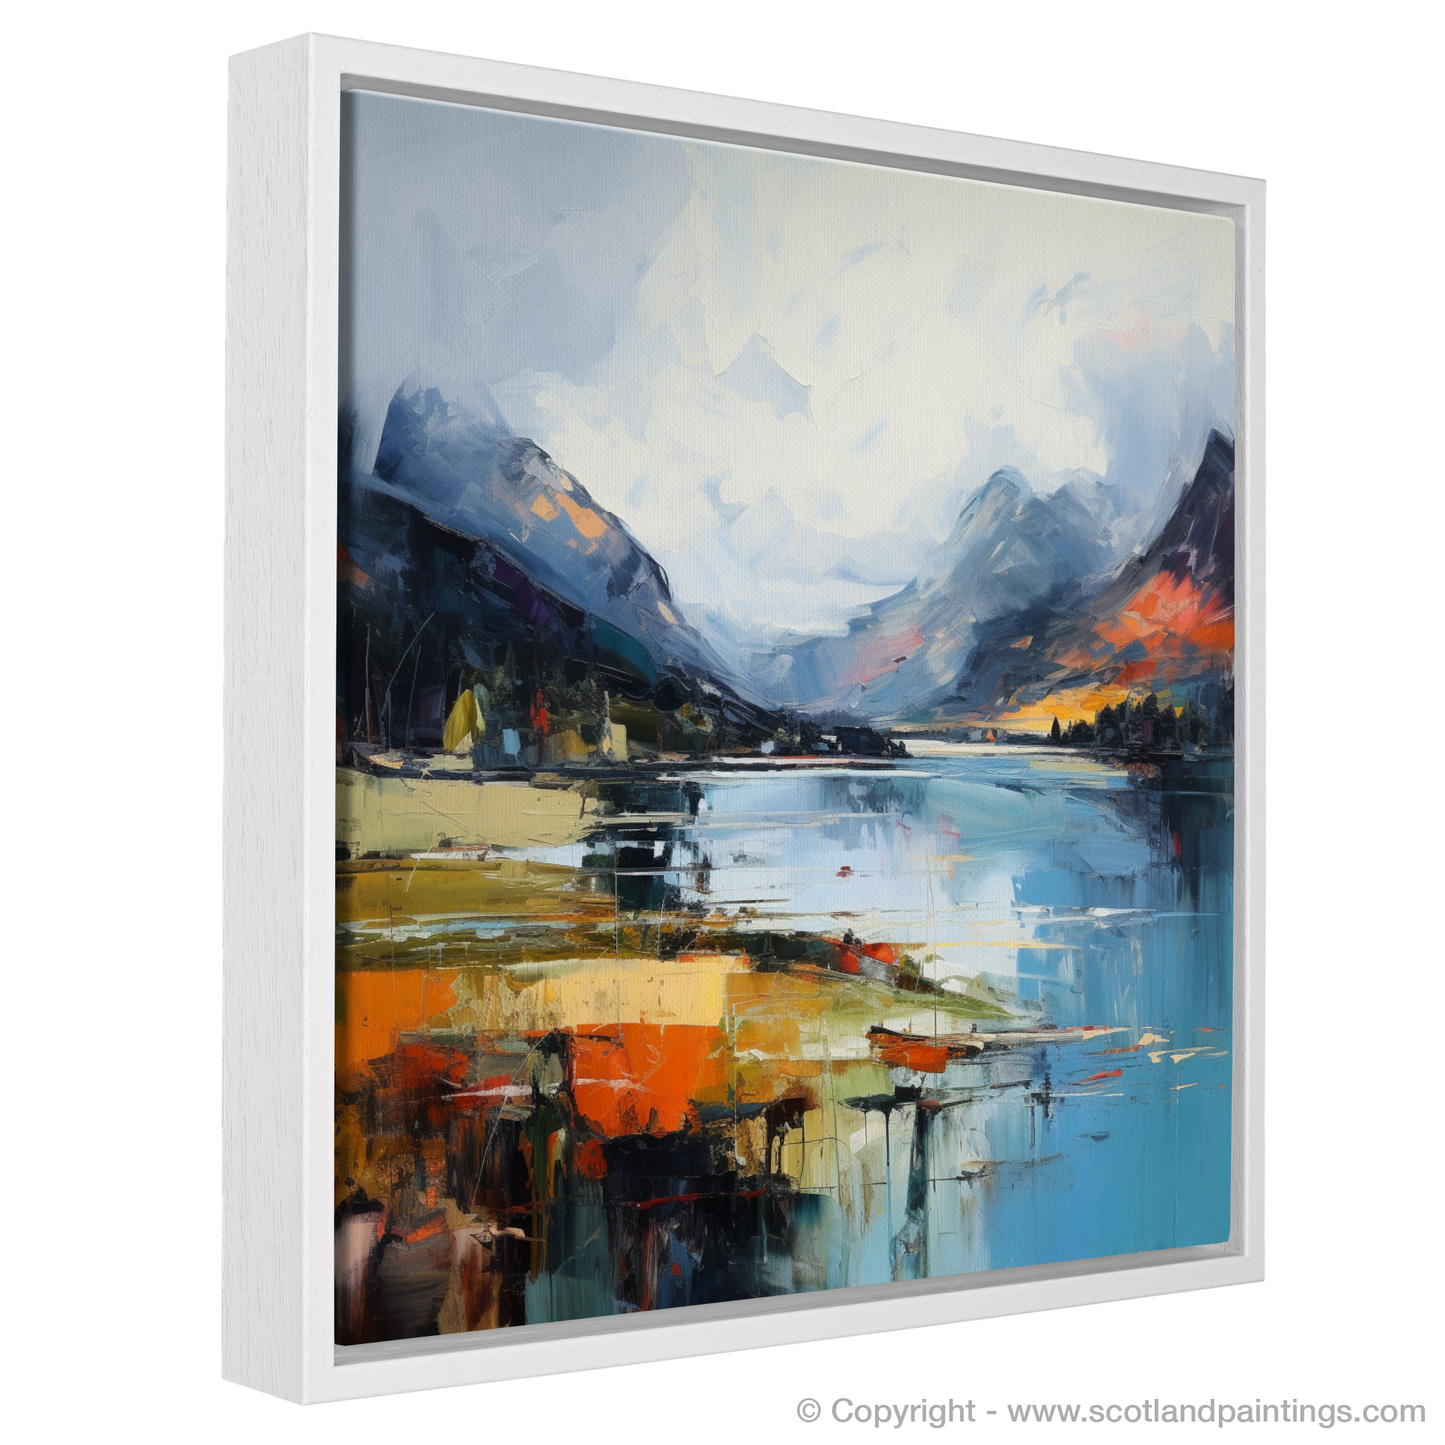 Painting and Art Print of Loch Leven, Highlands entitled "Expressionism Embrace: The Essence of Loch Leven".